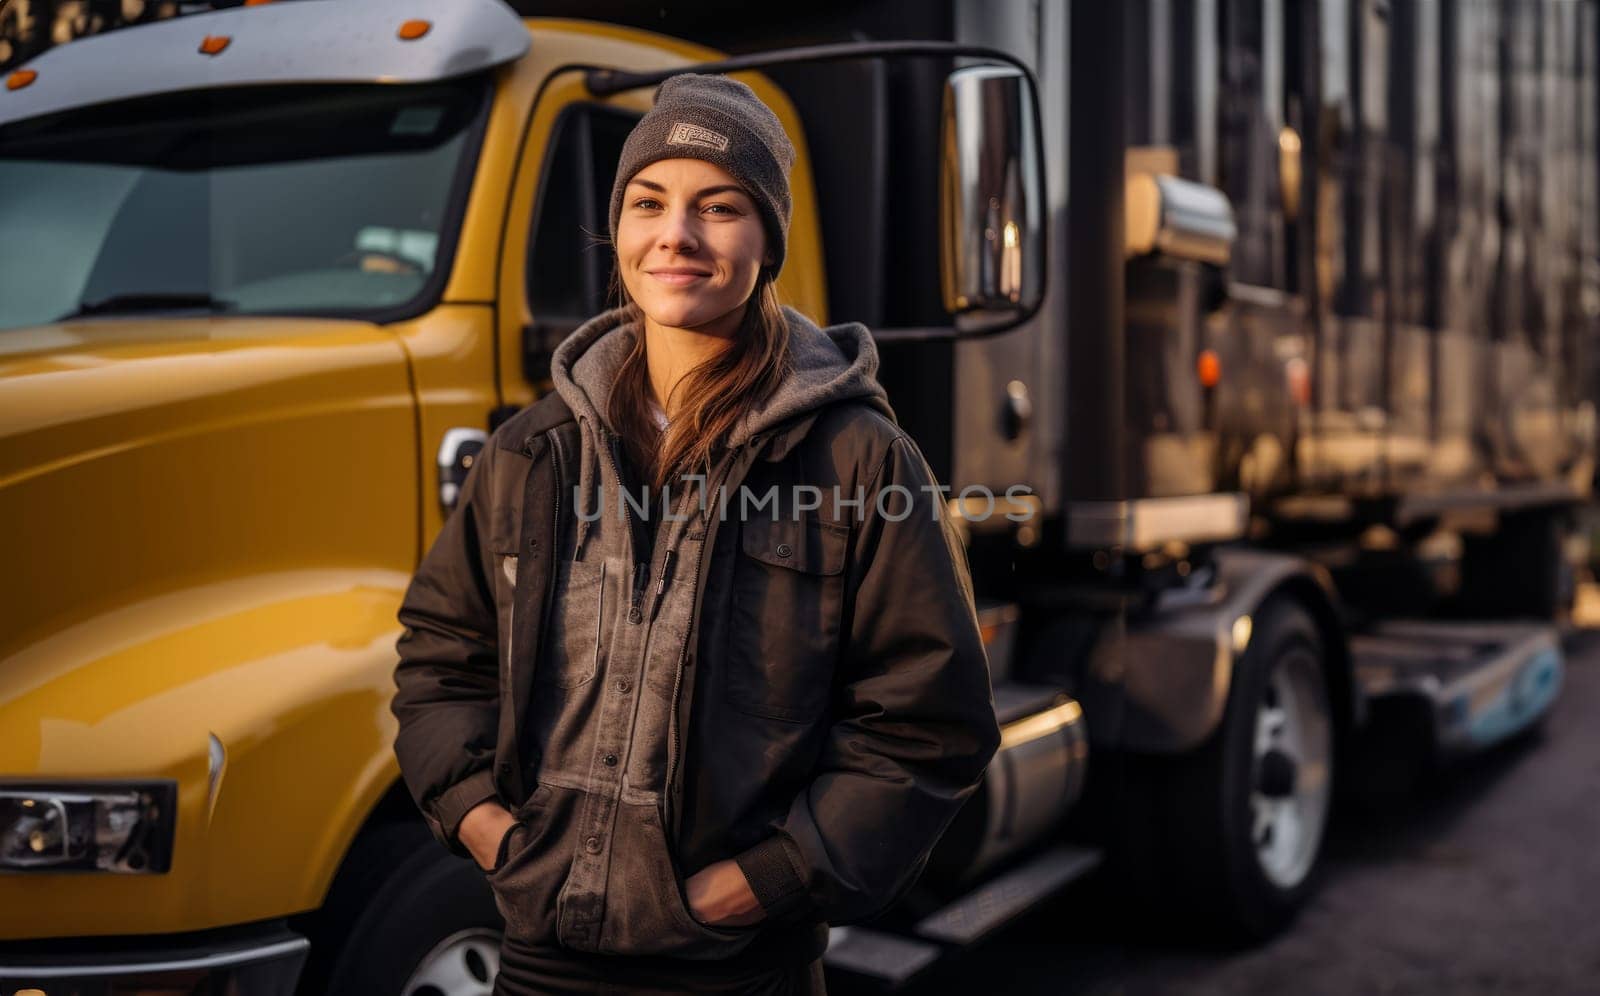 Female Trucker Takes a Break After Long Day.Generated image by dotshock